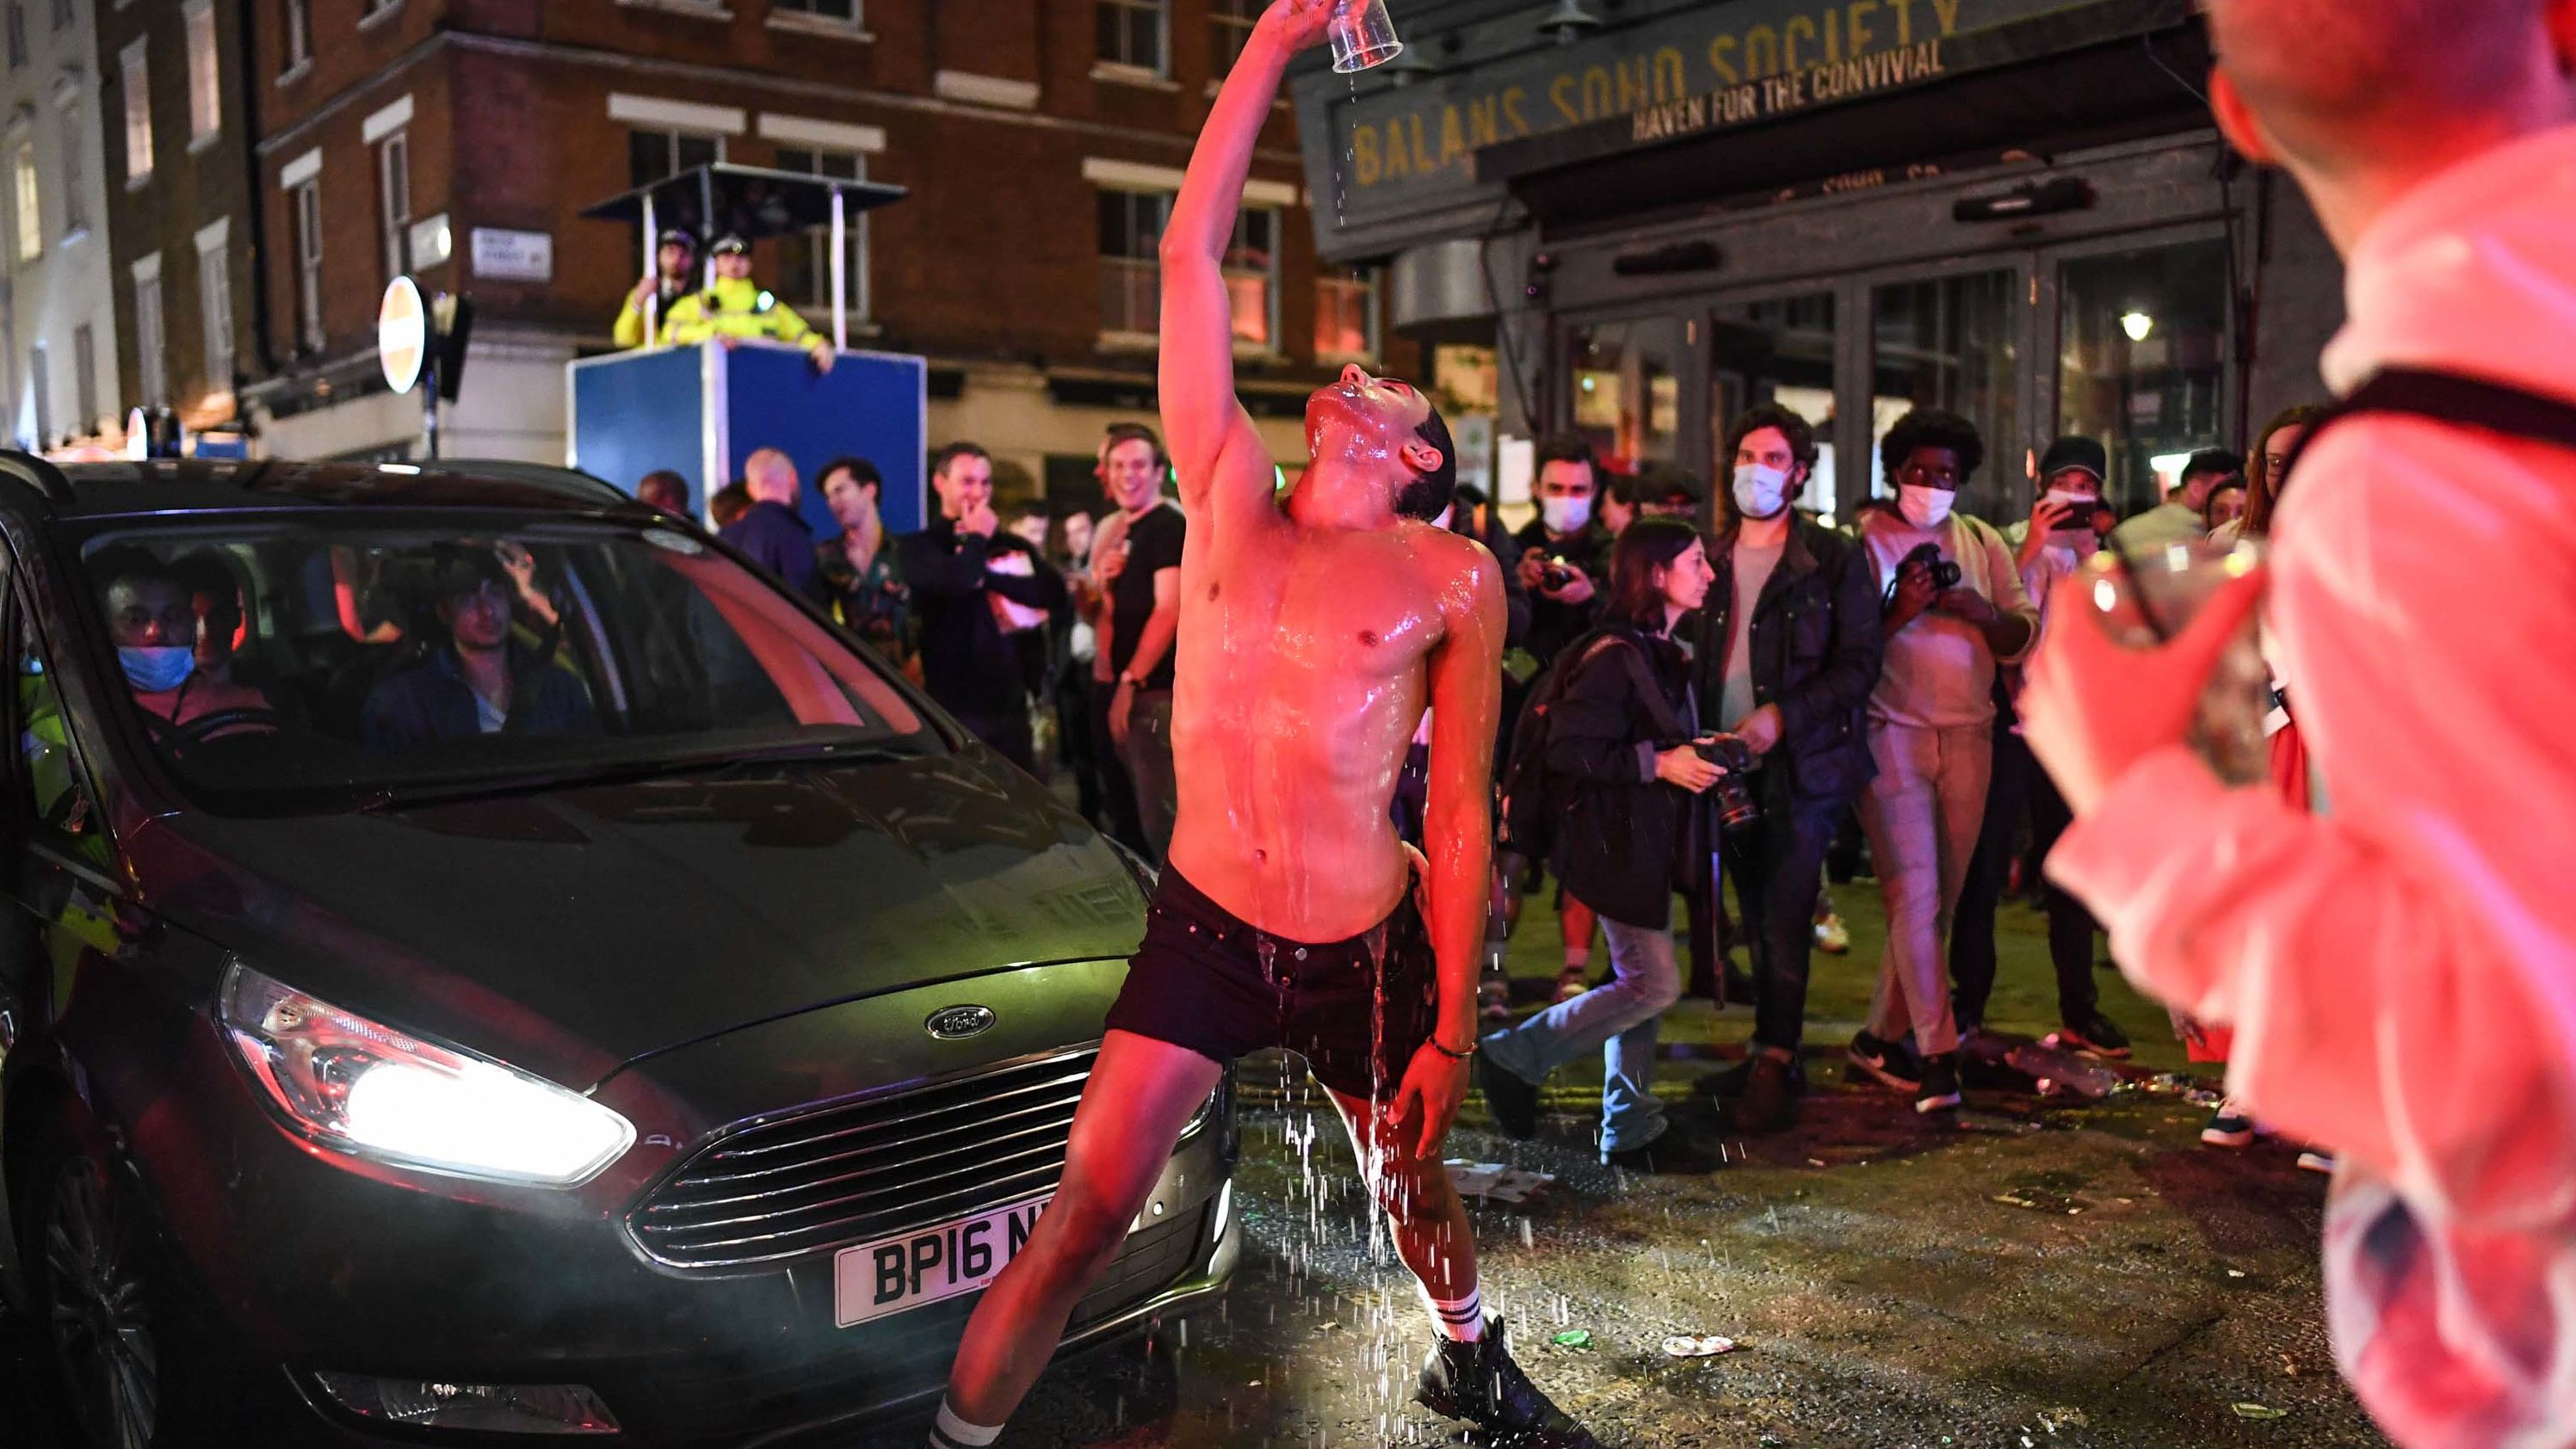 A man pours water over himself in London's Soho neighborhood on July 4 — the day pubs, hotels and restaurants <a href="https://www.cnn.com/2020/07/04/uk/uk-pubs-reopening-saturday-scli-gbr-intl/index.html" target="_blank">were allowed to reopen</a> in the United Kingdom.